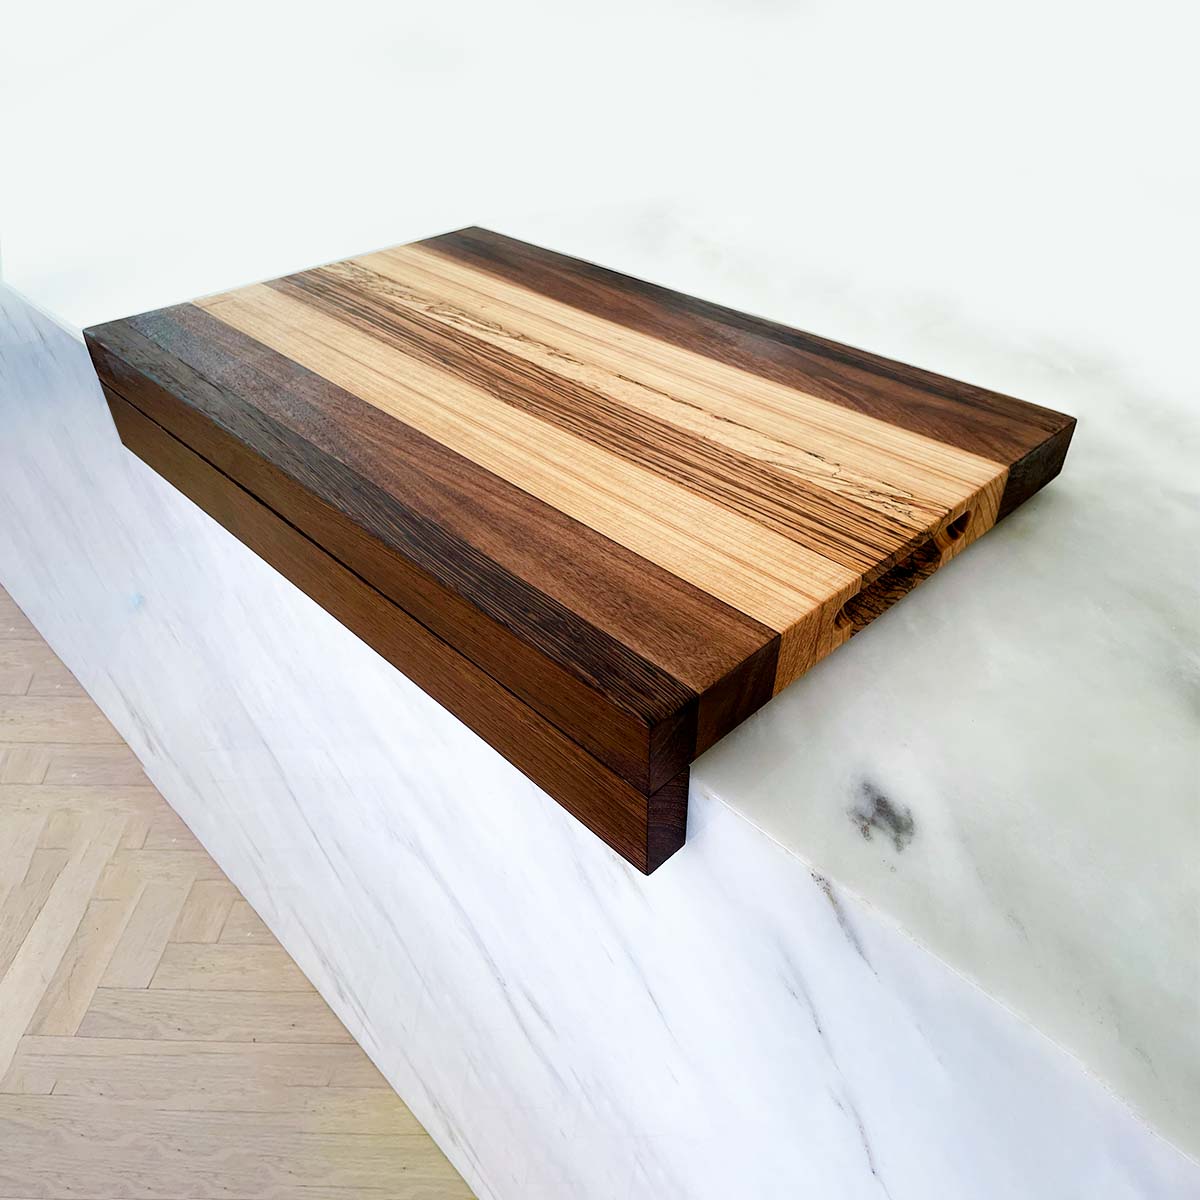 Walnut + Cypress + Wenge Edge Grain Over The Counter Cutting Board "The Lonsdale"